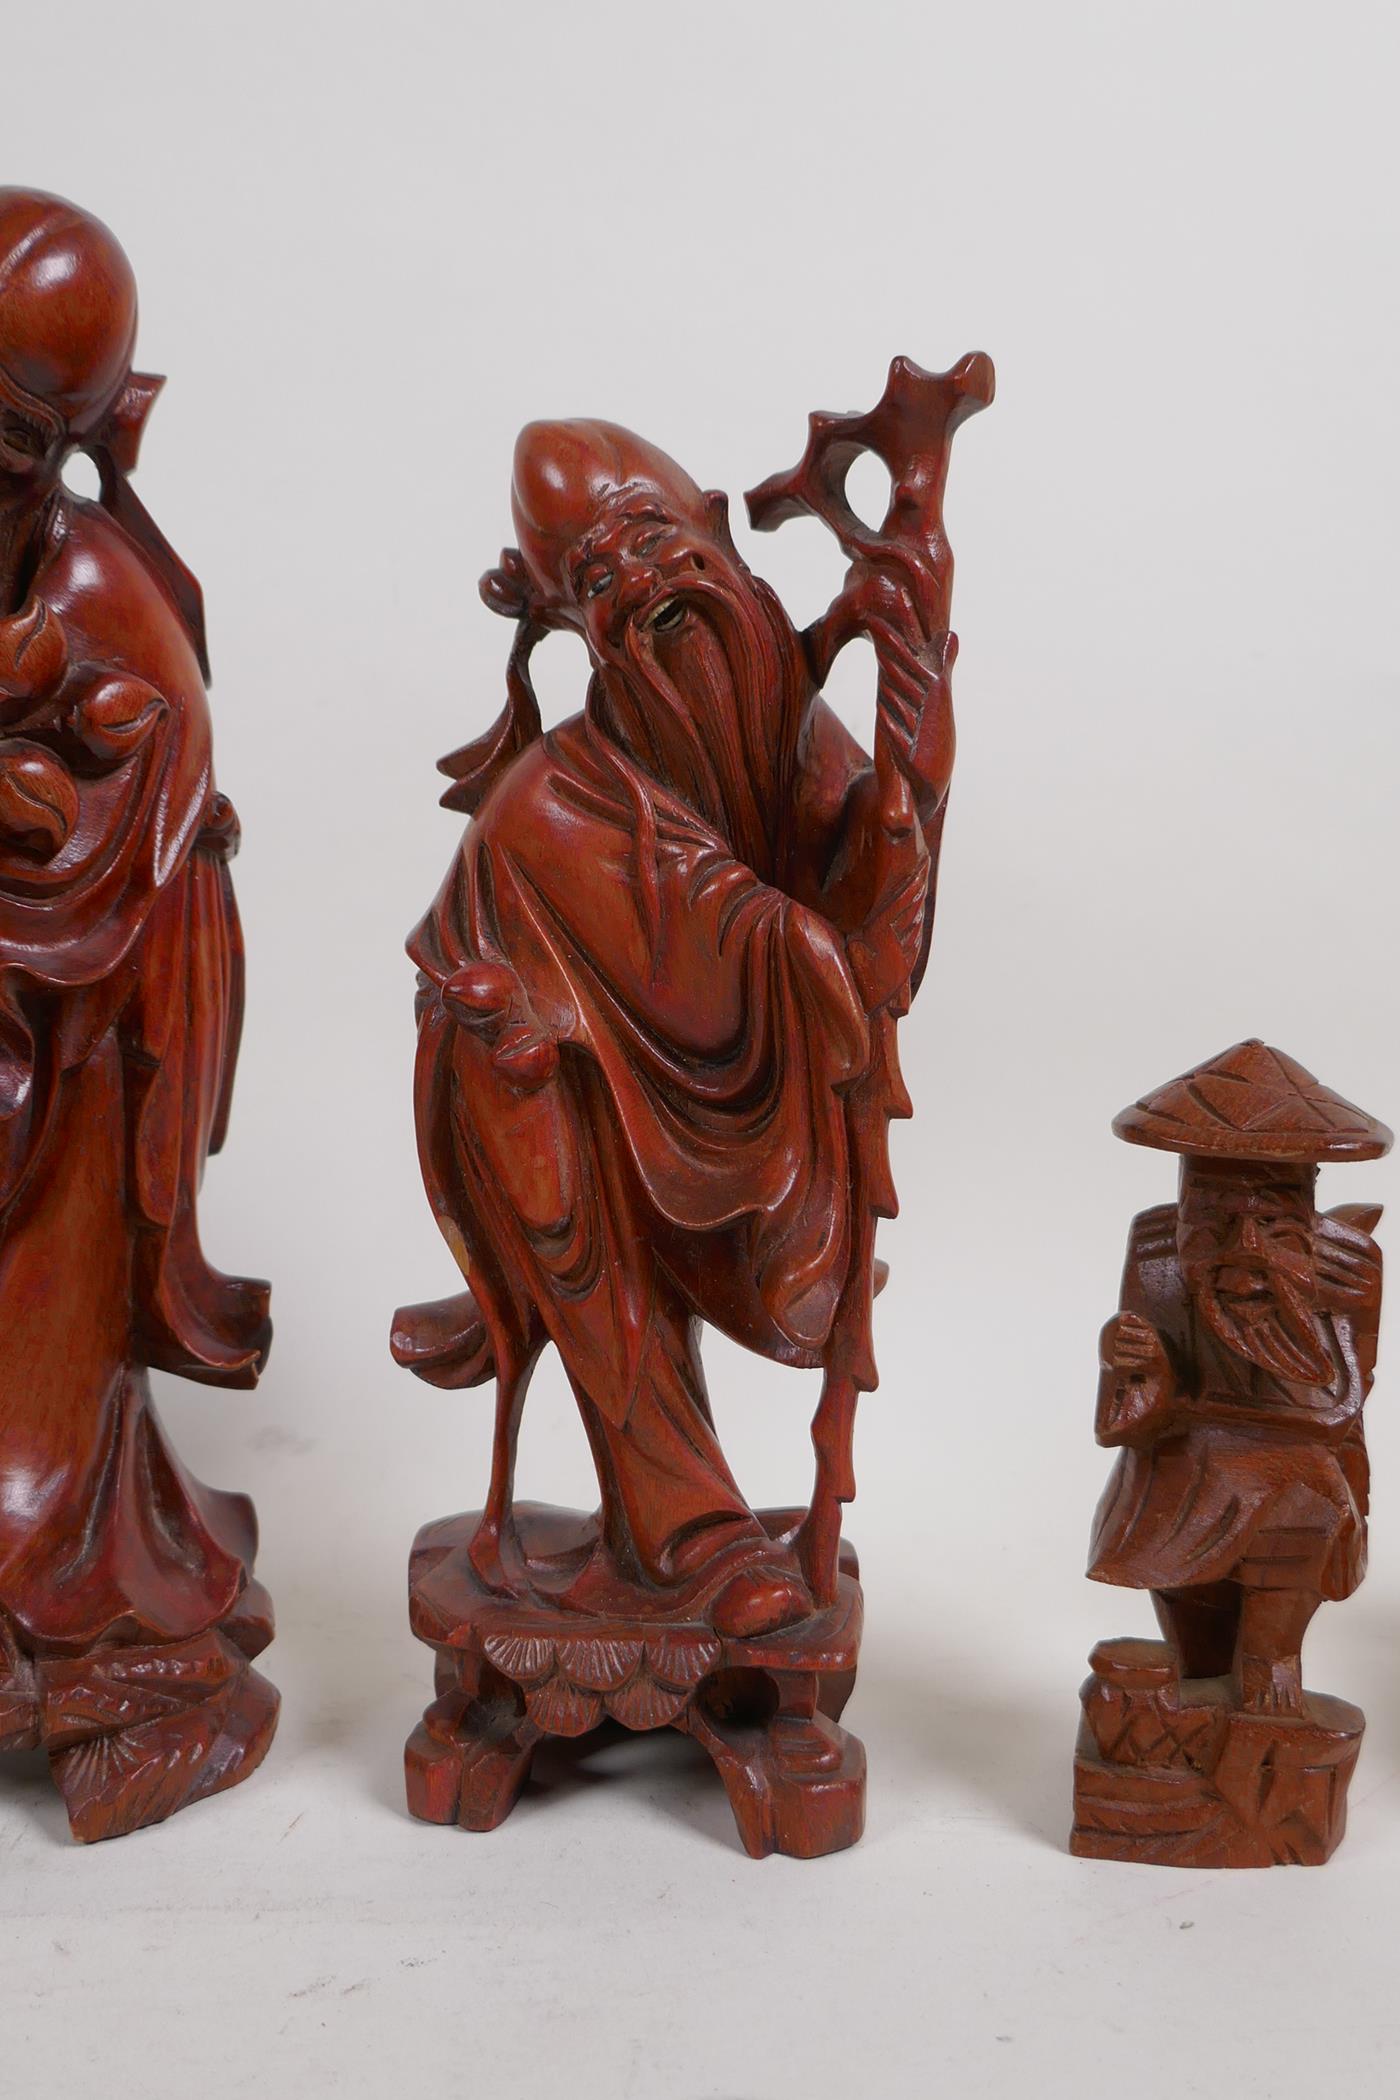 Seven Chinese carved hardwood figures, with depictions of Shao Lao and Buddha, largest 9½" high, AF - Image 6 of 8